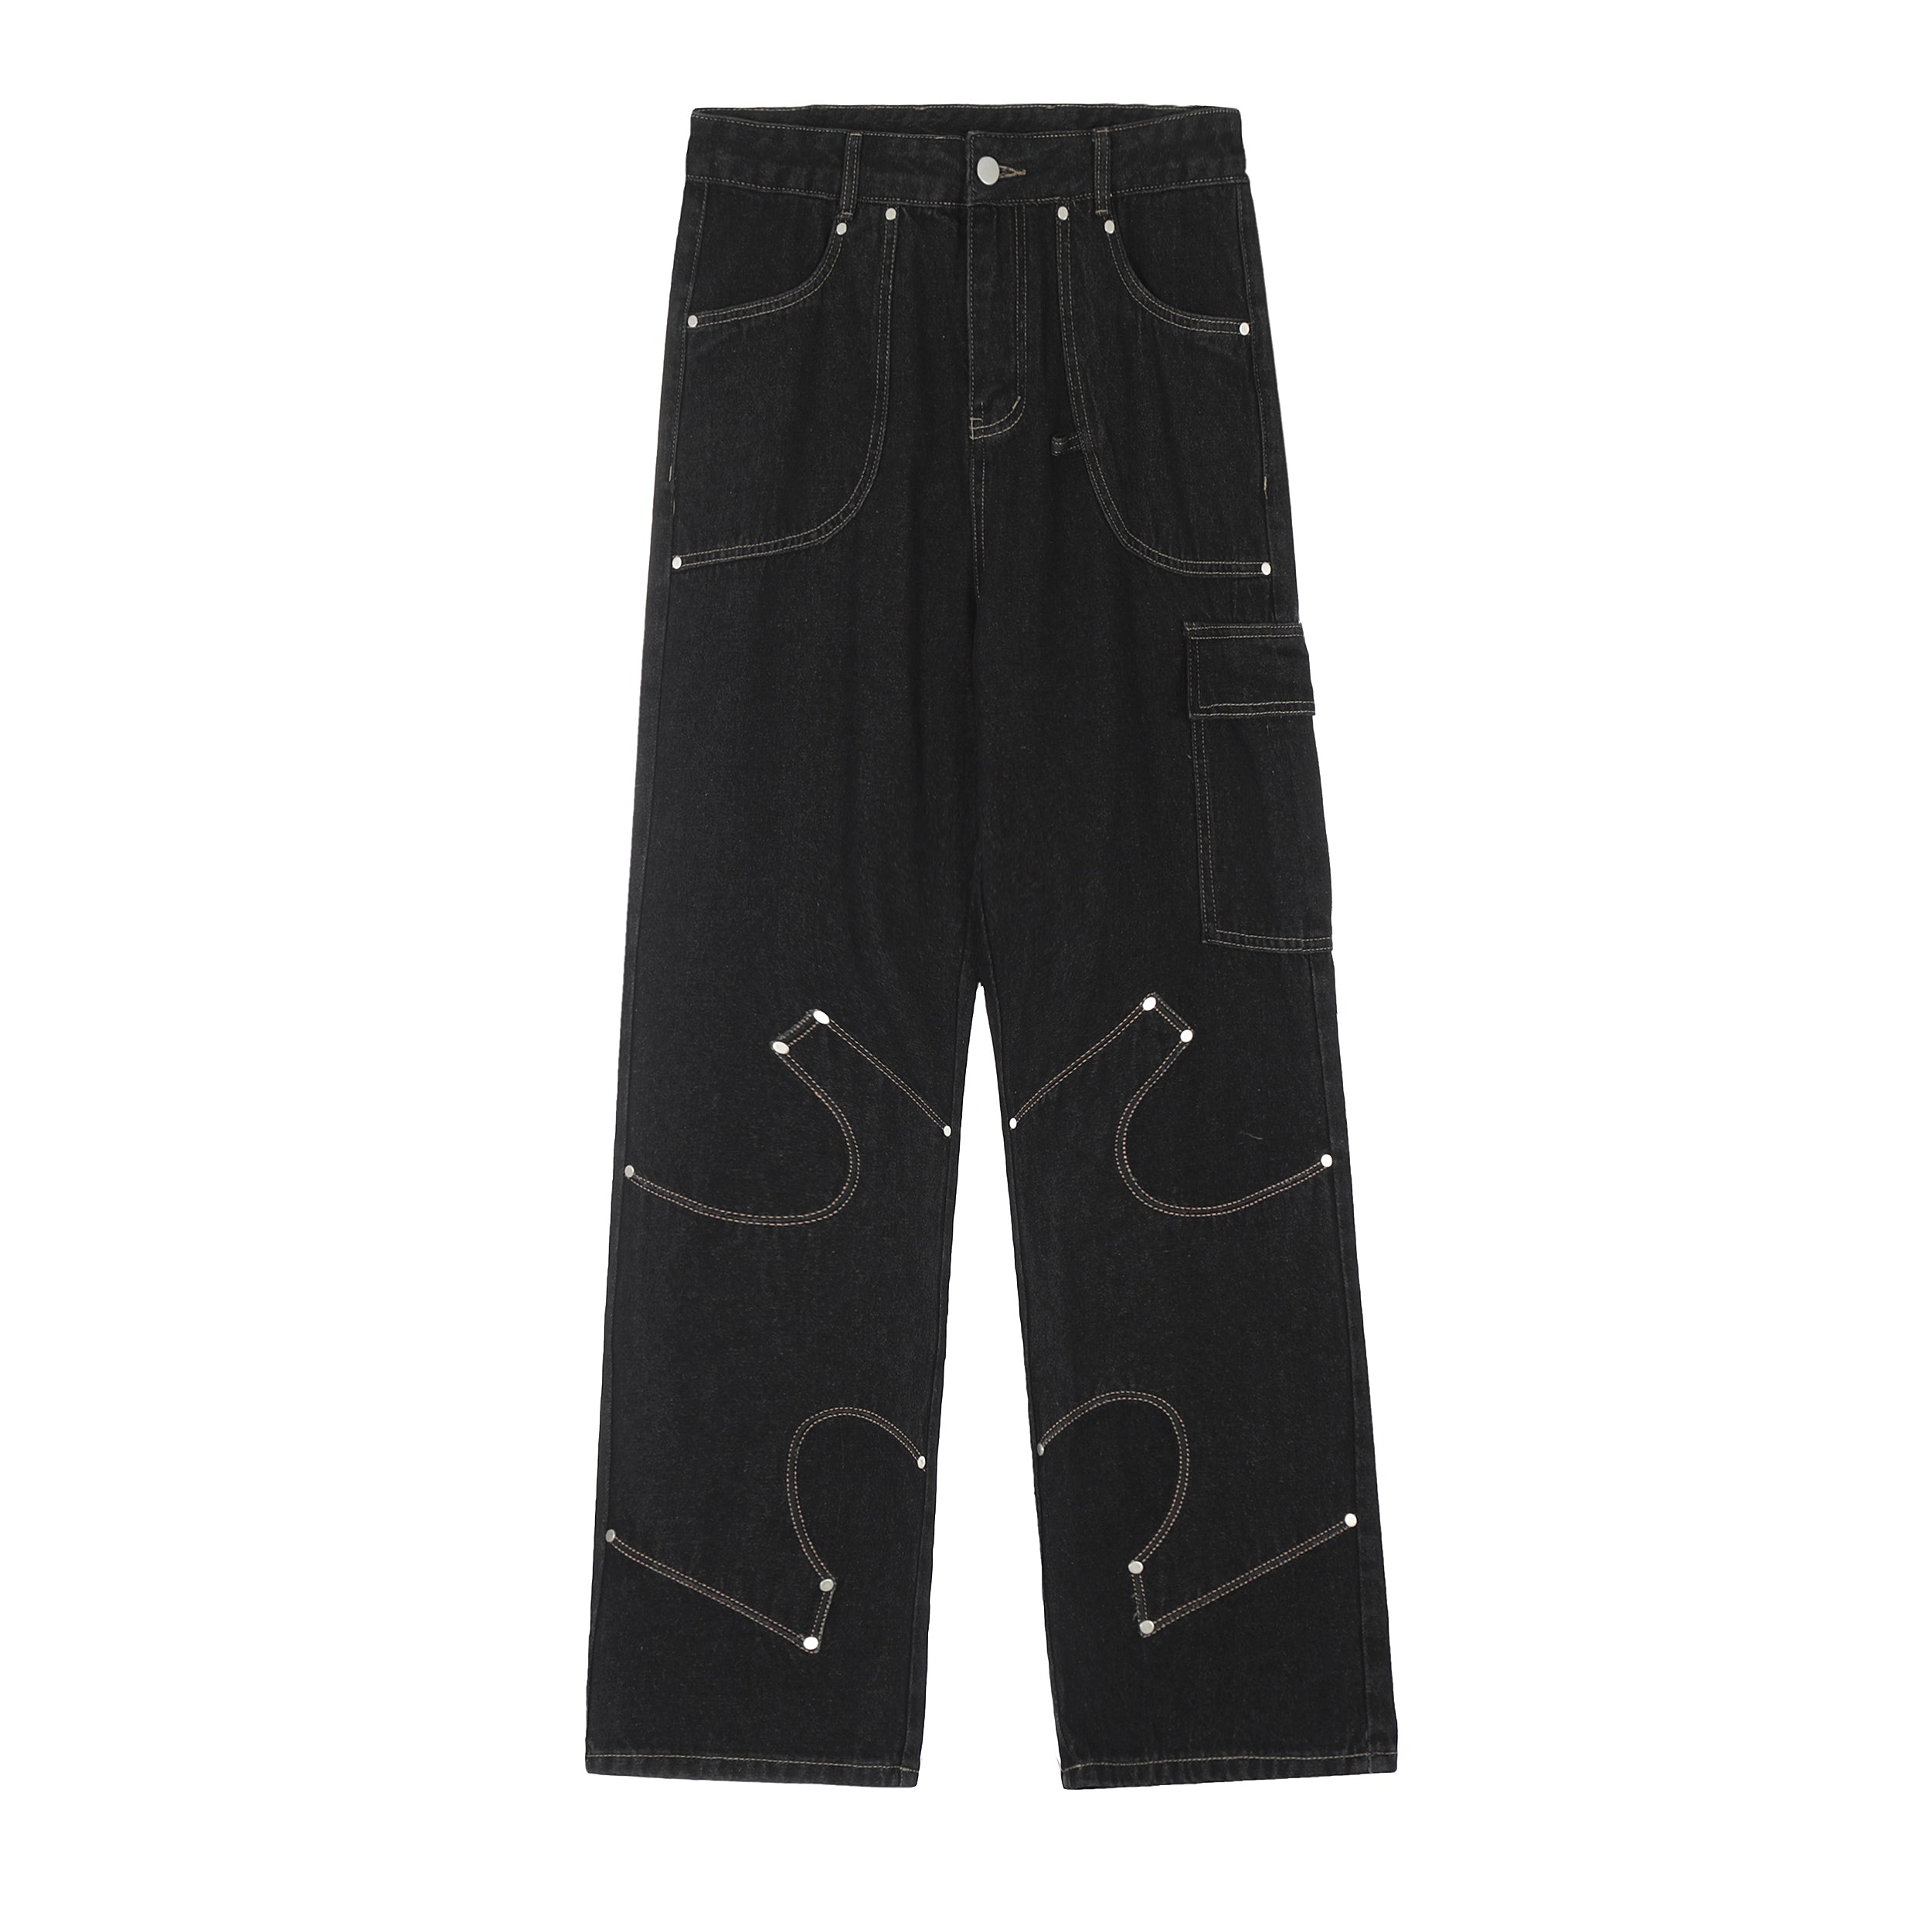 "Galaxy Rider" Embellished Jeans - Santo 